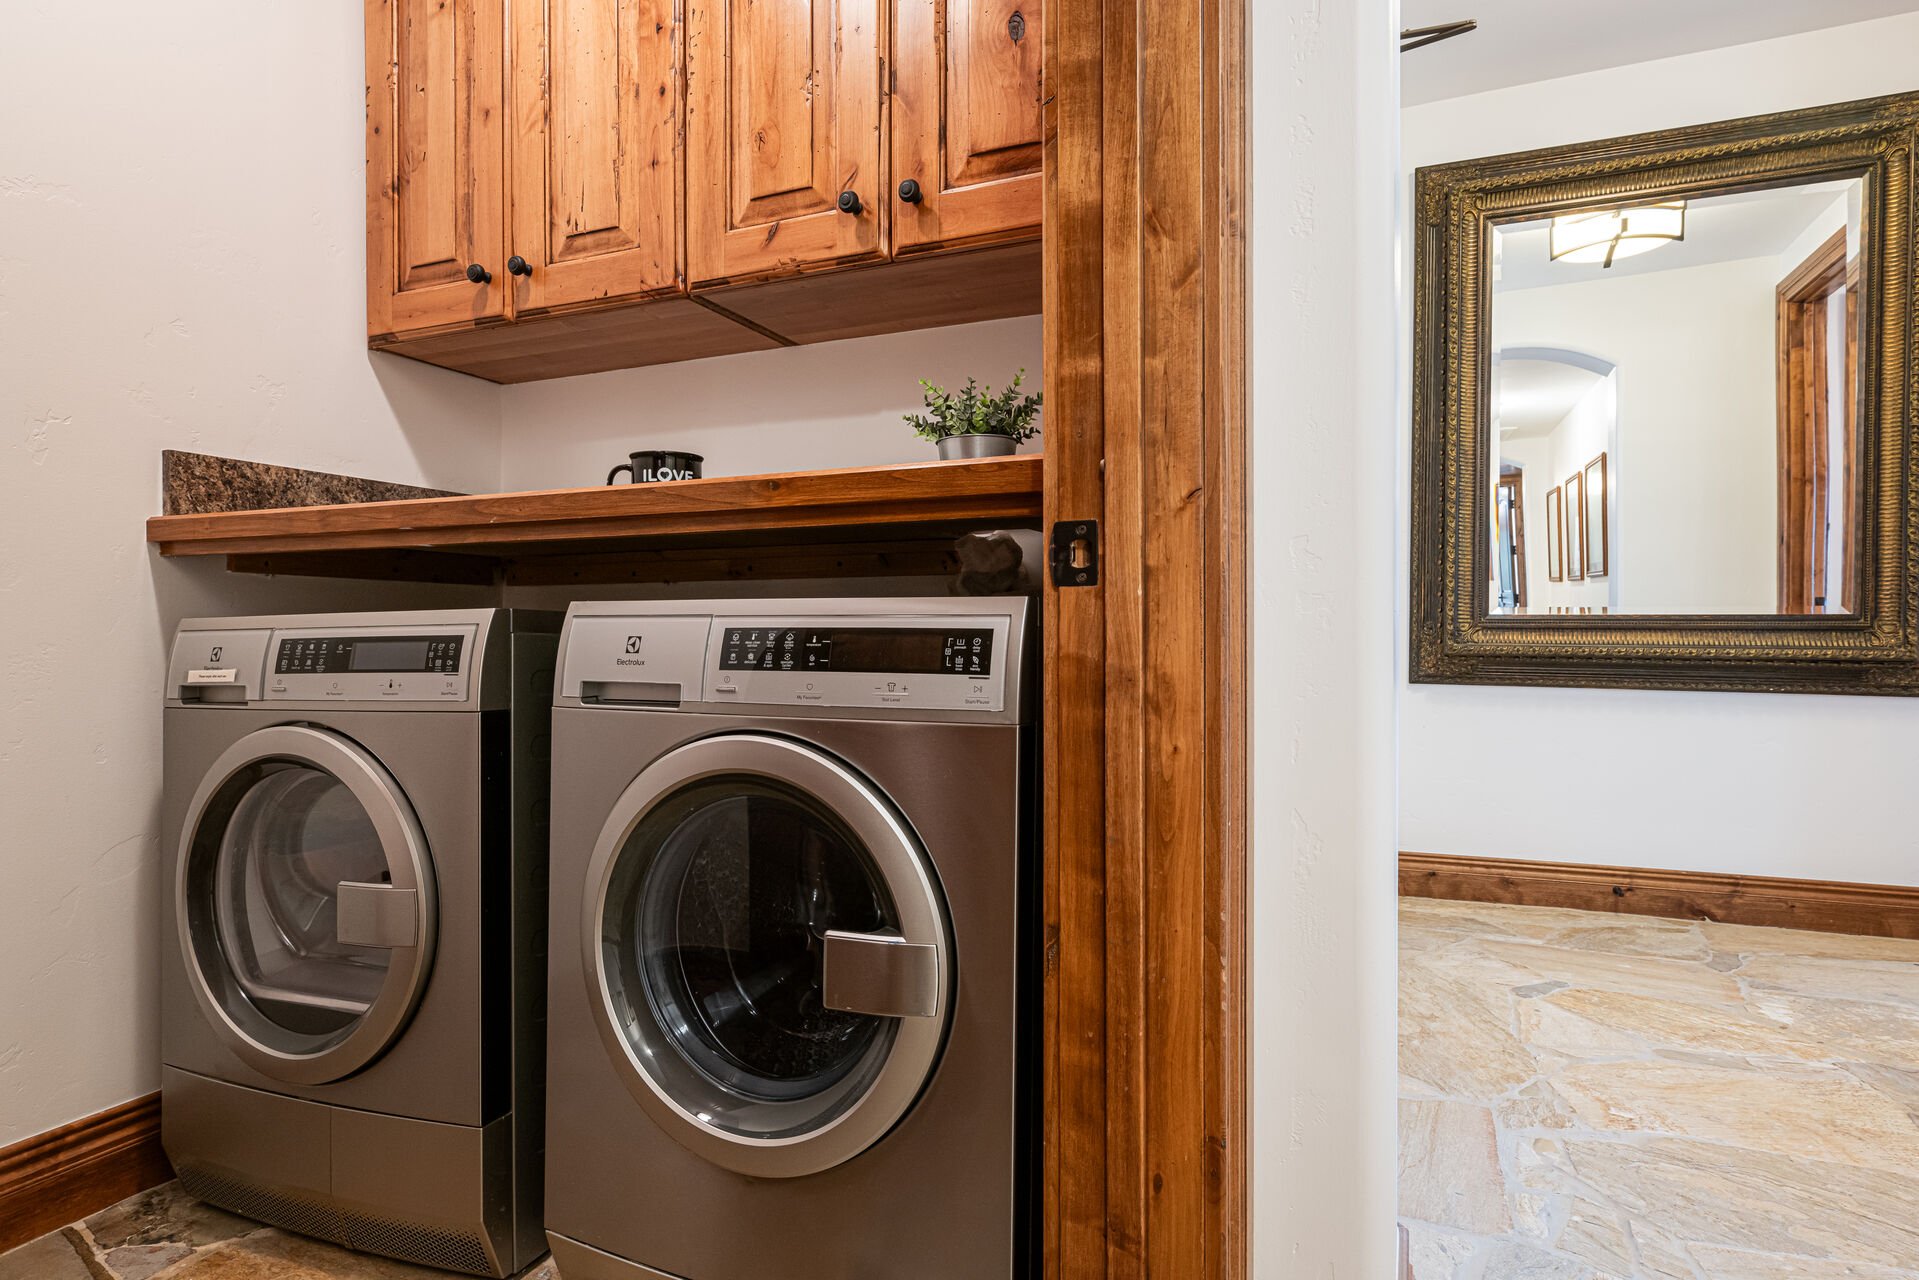 Laundry Room with front load washer and dryer